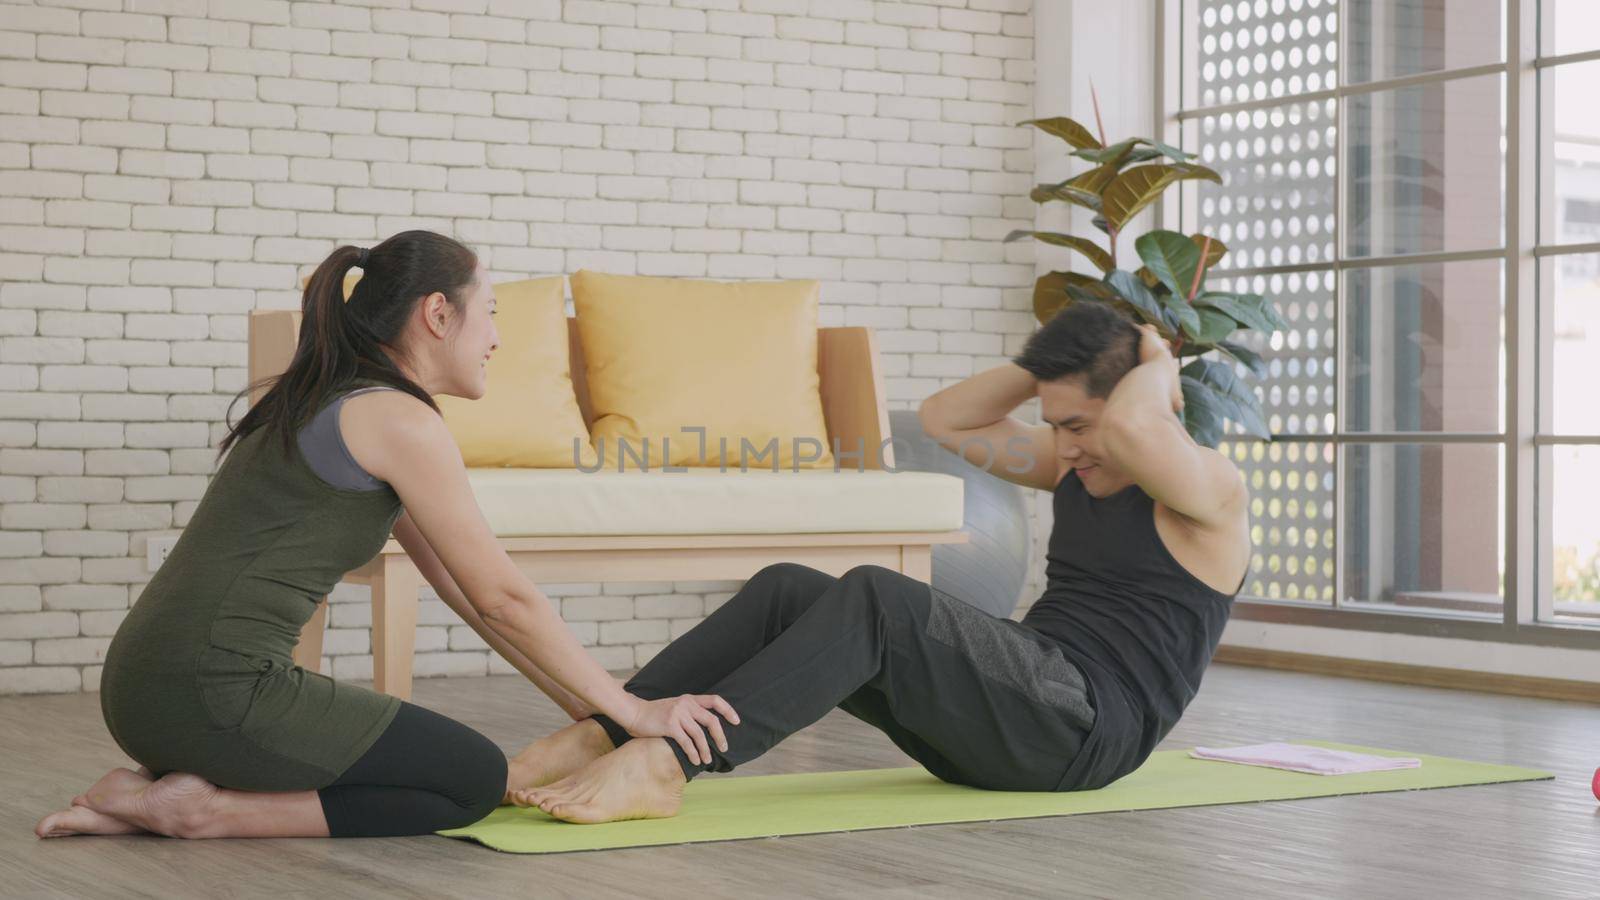 Happy Asian family couple husband and wife healthy trainer workout home in the living room. Fit man lifestyle doing sit up fitness exercise at home on floor with girlfriend support helping boyfriend